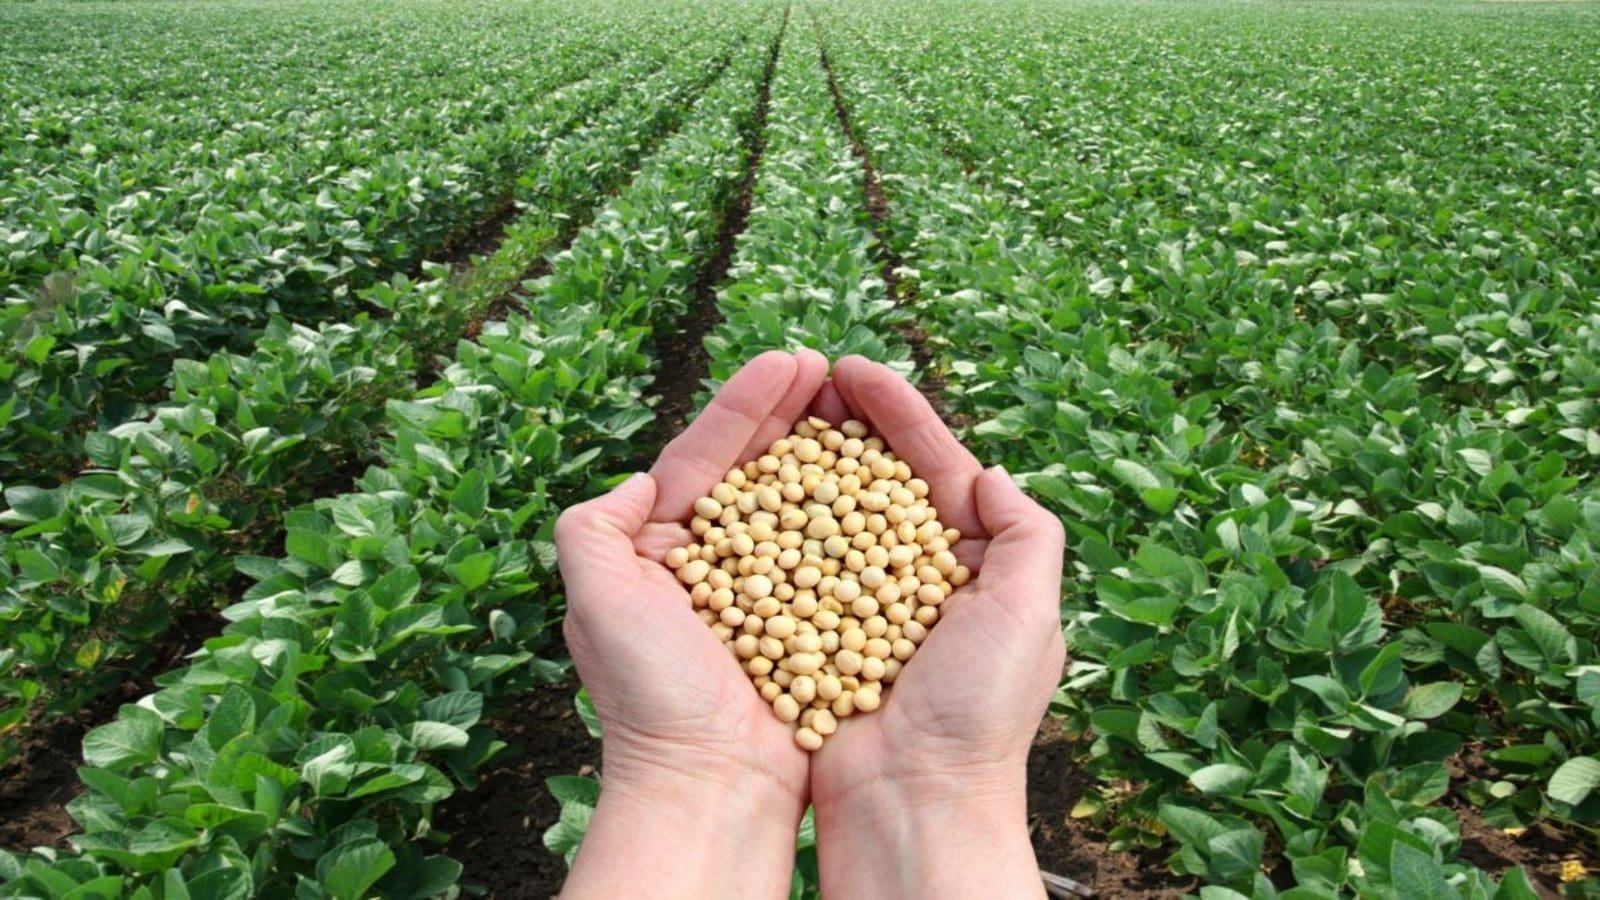 Soy cultivation in Europe poised to reach unprecedented heights